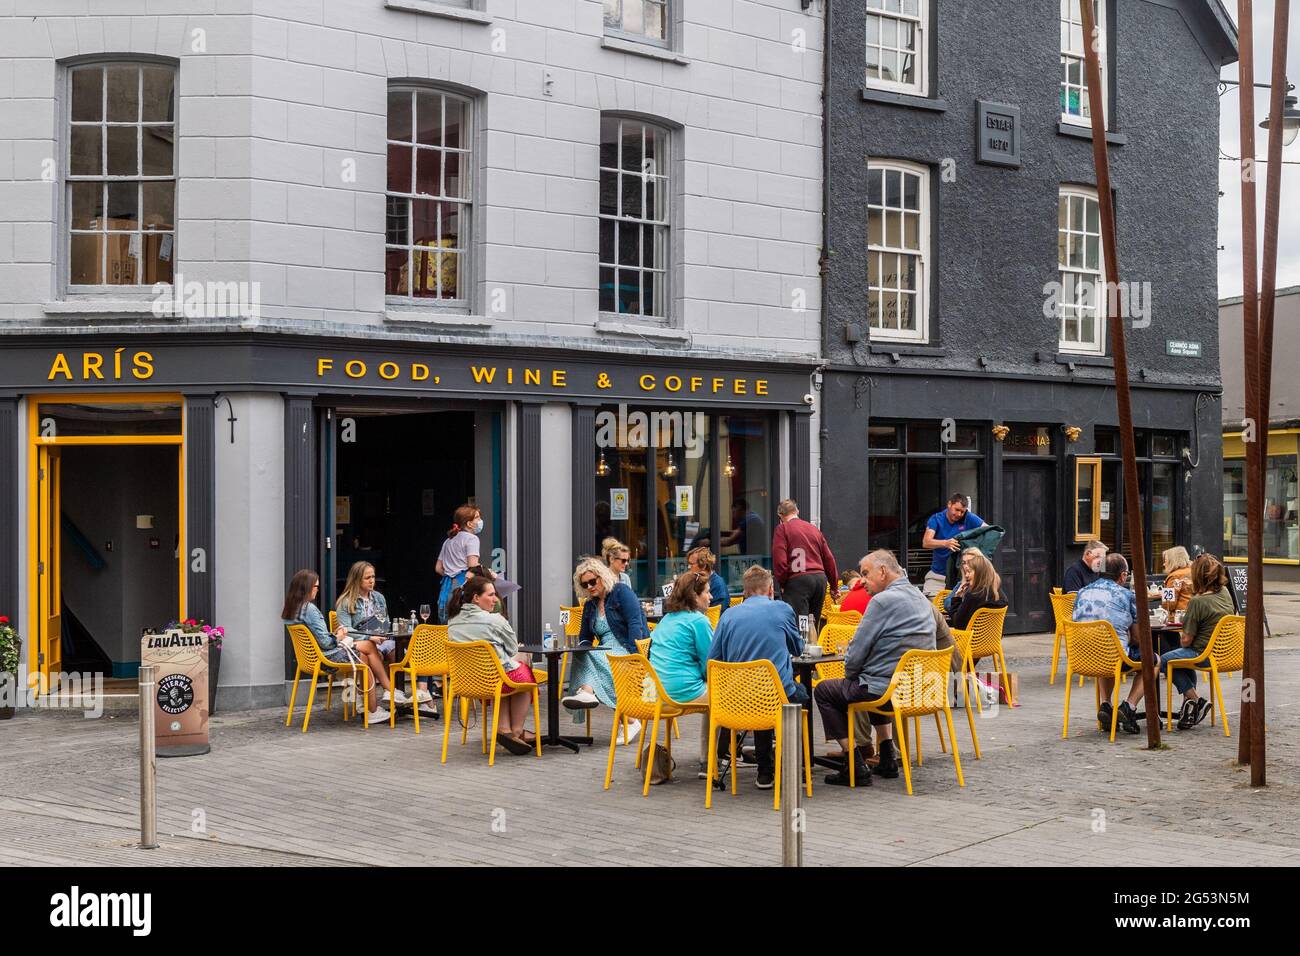 Clonakilty, West Cork, Ireland. 25th June, 2021. People were taking advantage of the good weather in Clonakilty today as they ate outside. The government is further easing COVID-19 restrictions on 5th July, dependant on the spread of the Delta variant of the virus. Credit: AG News/Alamy Live News Stock Photo